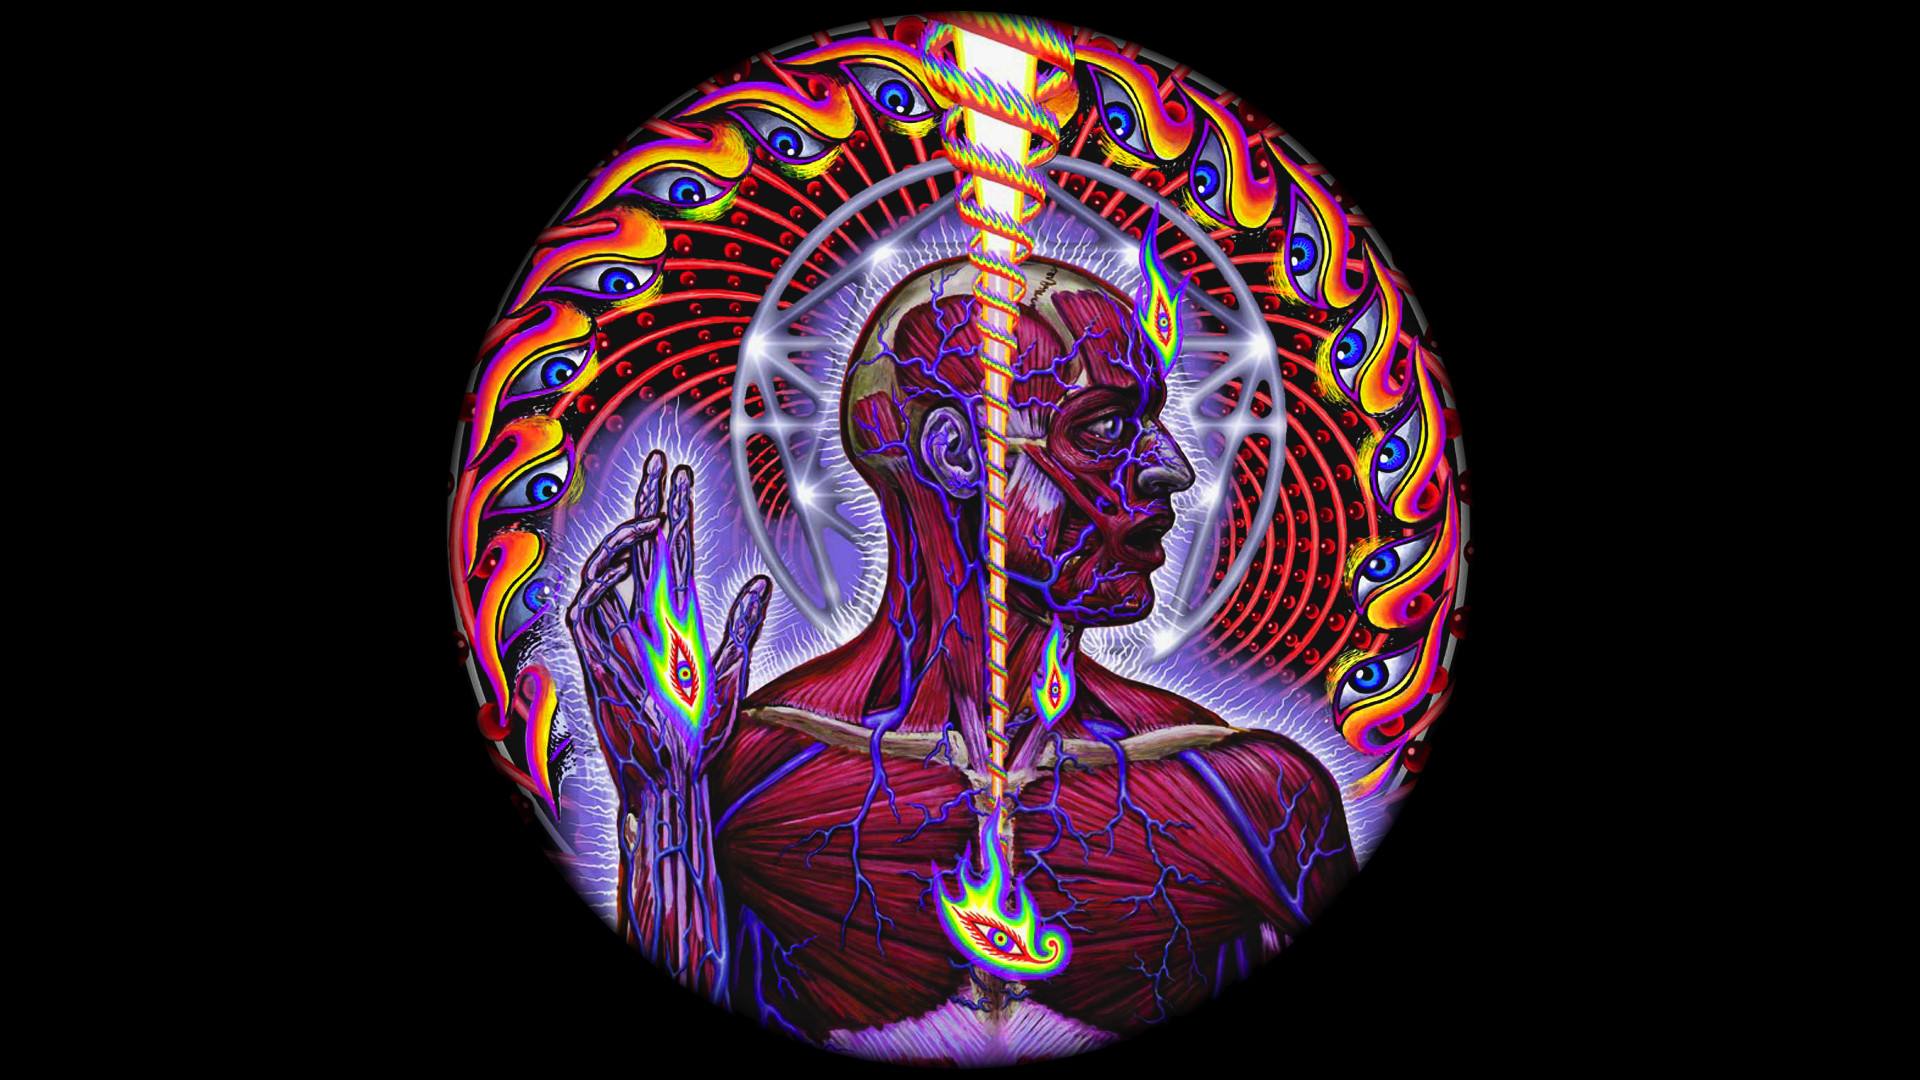 Tool Lateralus Wallpaper Posted By Samantha